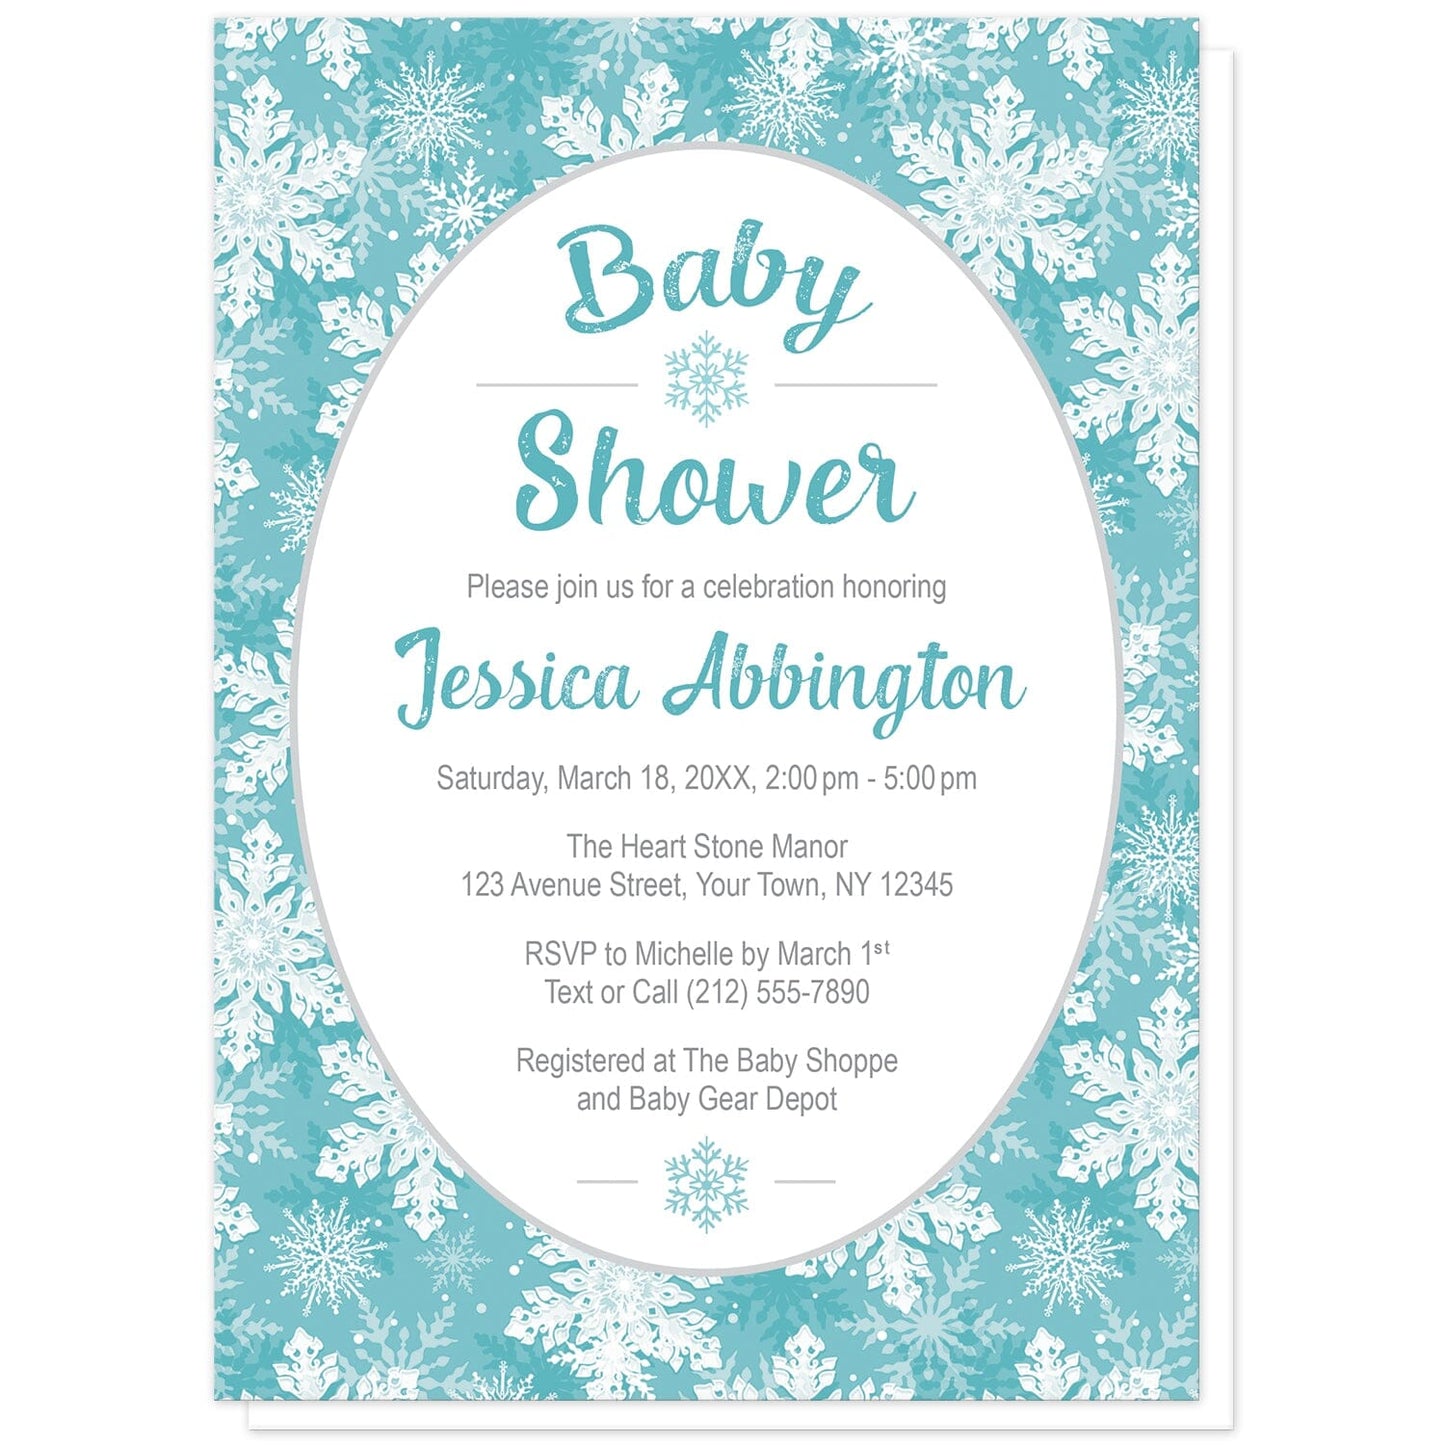 Teal Snowflake Baby Shower Invitations at Artistically Invited. Beautifully ornate teal snowflake baby shower invitations designed with your personalized baby shower details custom printed in teal and gray in a white oval frame design over a pretty teal, turquoise, and white snowflake pattern background.